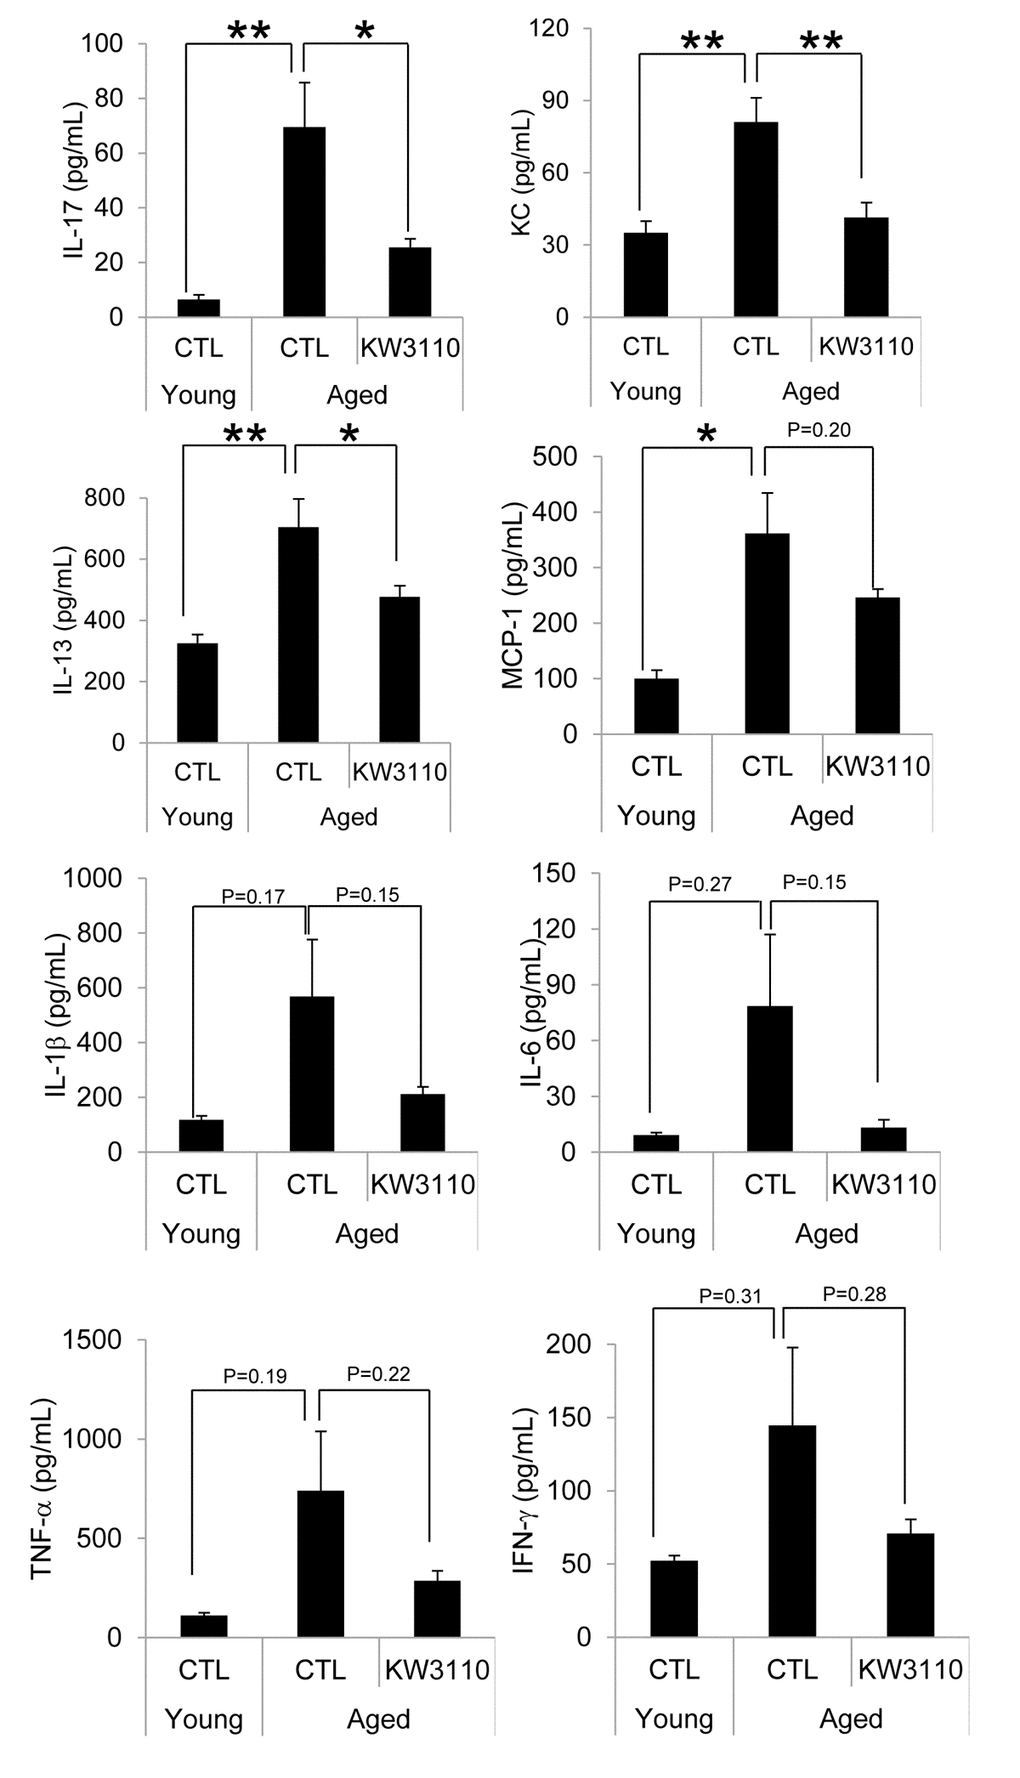 The levels of proinflammatory cytokines in the serum were mitigated in aged mice fed a diet containing Lactobacillus paracasei KW3110 as compared with age-matched control mice. Serum was collected and subjected to multiplex analyses to determine levels of cytokines (IL-1β, IL-6, IL-13, IL-17, IFN-γ, TNF-α, KC, and MCP1) in young (3-months-old) and aged mice (22-months-old). Values are presented as the means ± SEM. Significance was assumed if the p value was *p **p Lactobacillus paracasei KW3110 diet; IL = interleukin; IFN = interferon; TNF = tumor necrosis factor; KC = keratinocyte chemoattractant; MCP1 = monocyte chemoattractant protein 1.